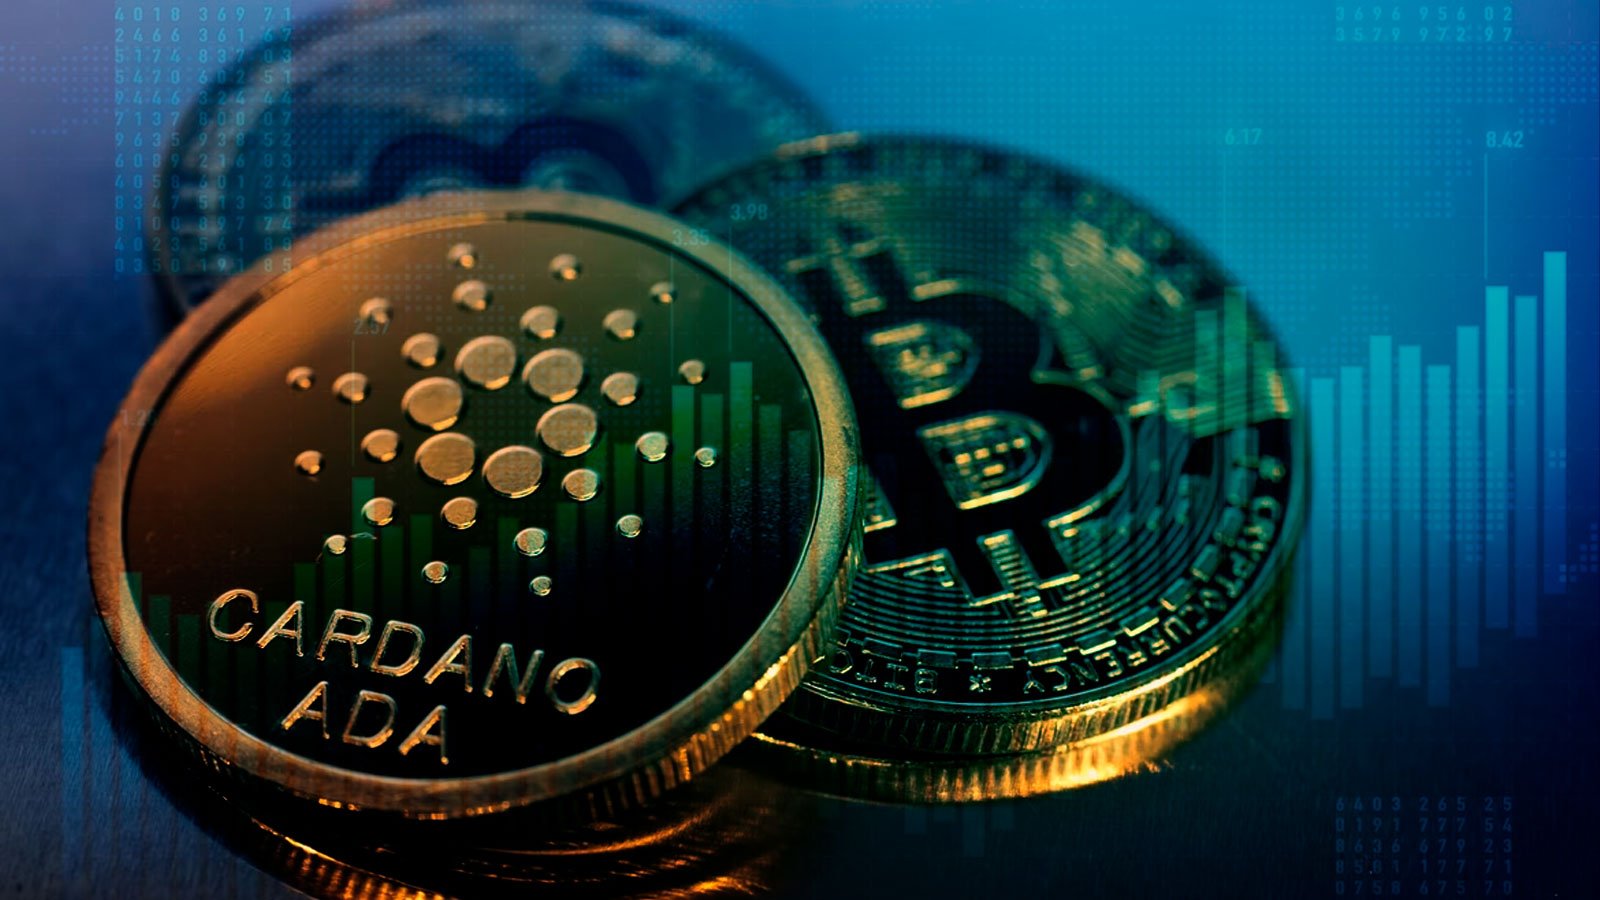 Cardano (ADA) Can Now Be Traded Against Bitcoin (BTC) on Major Crypto Exchange